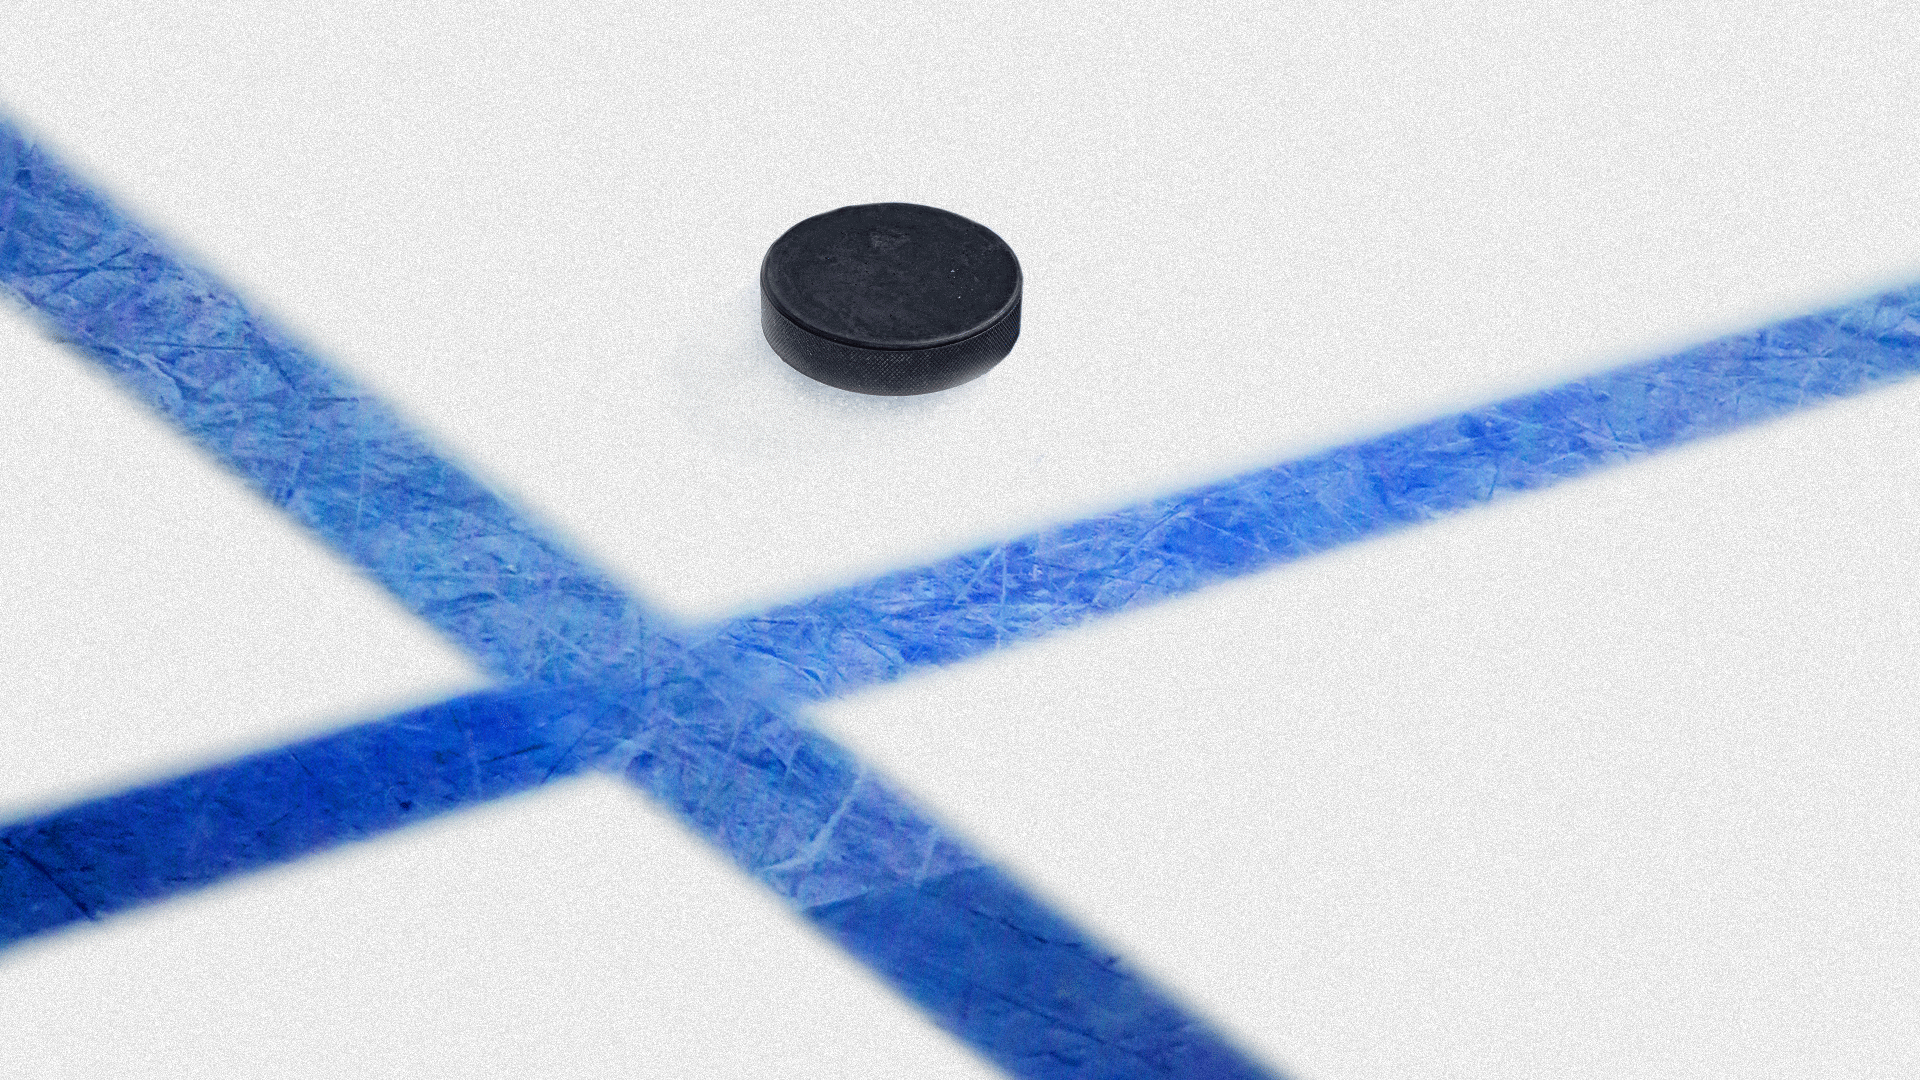 Illustration of a hockey puck over the blue line altered to resemble a Finnish flag